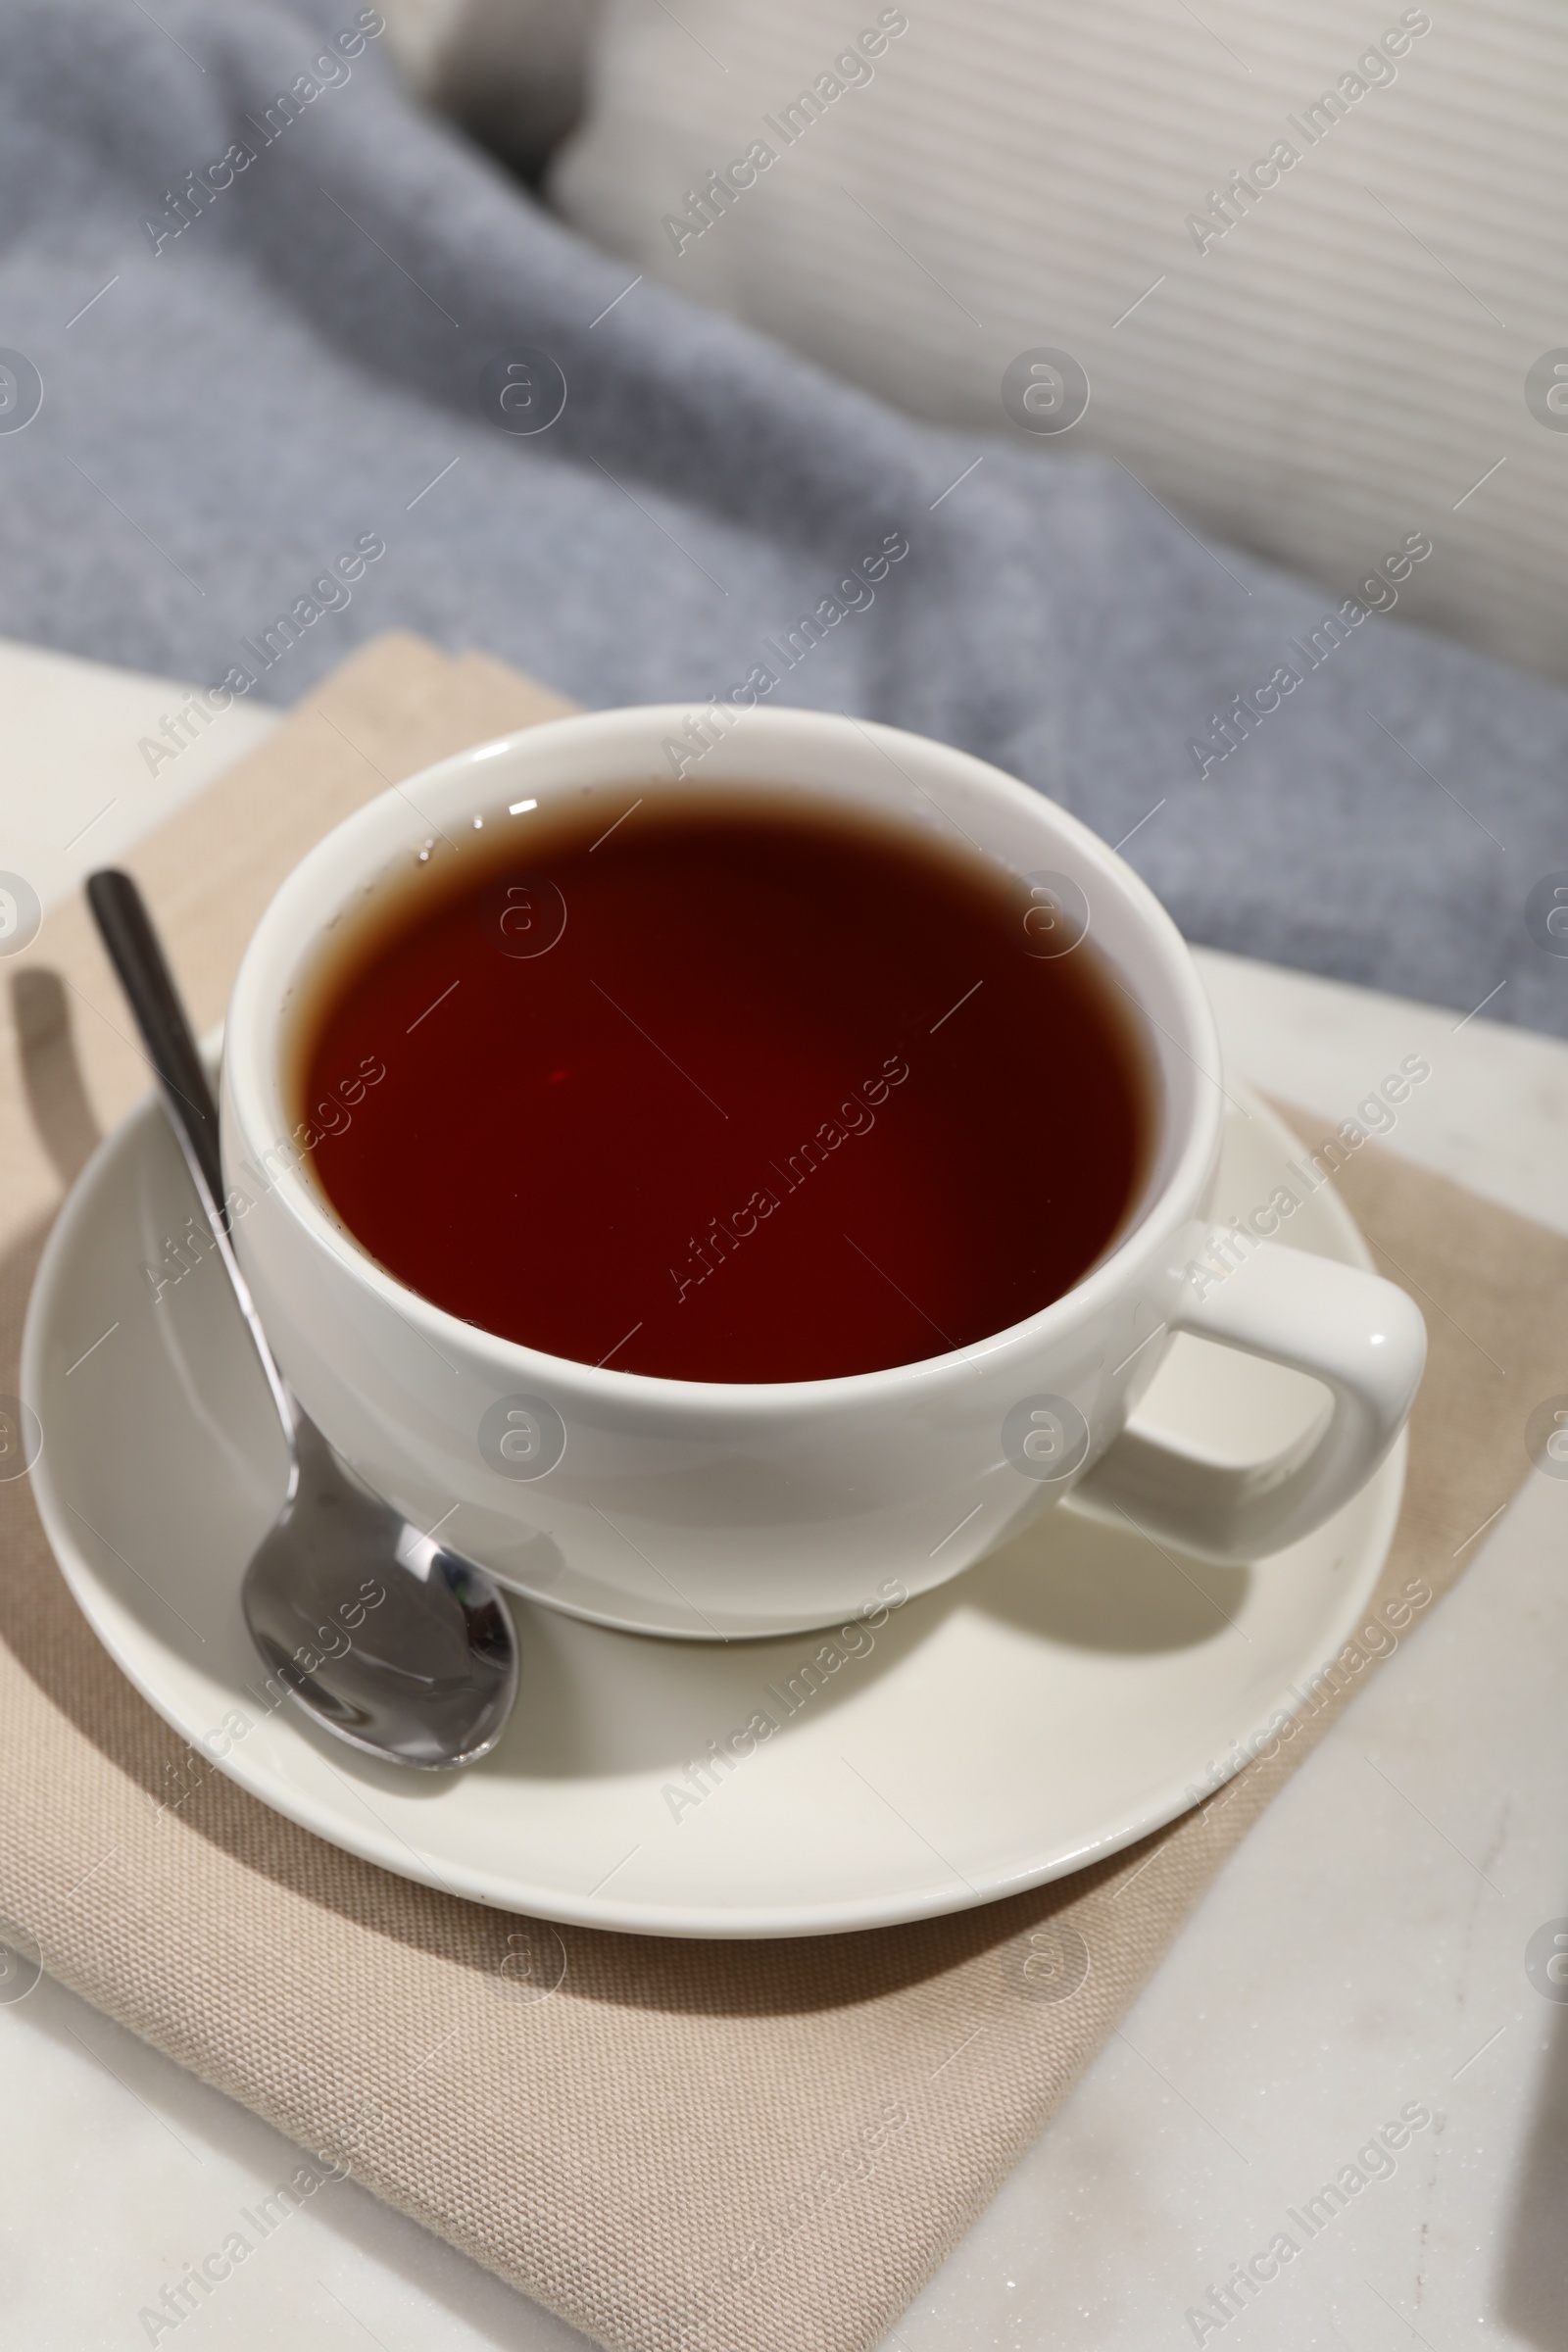 Photo of Aromatic tea in cup, saucer and spoon on table